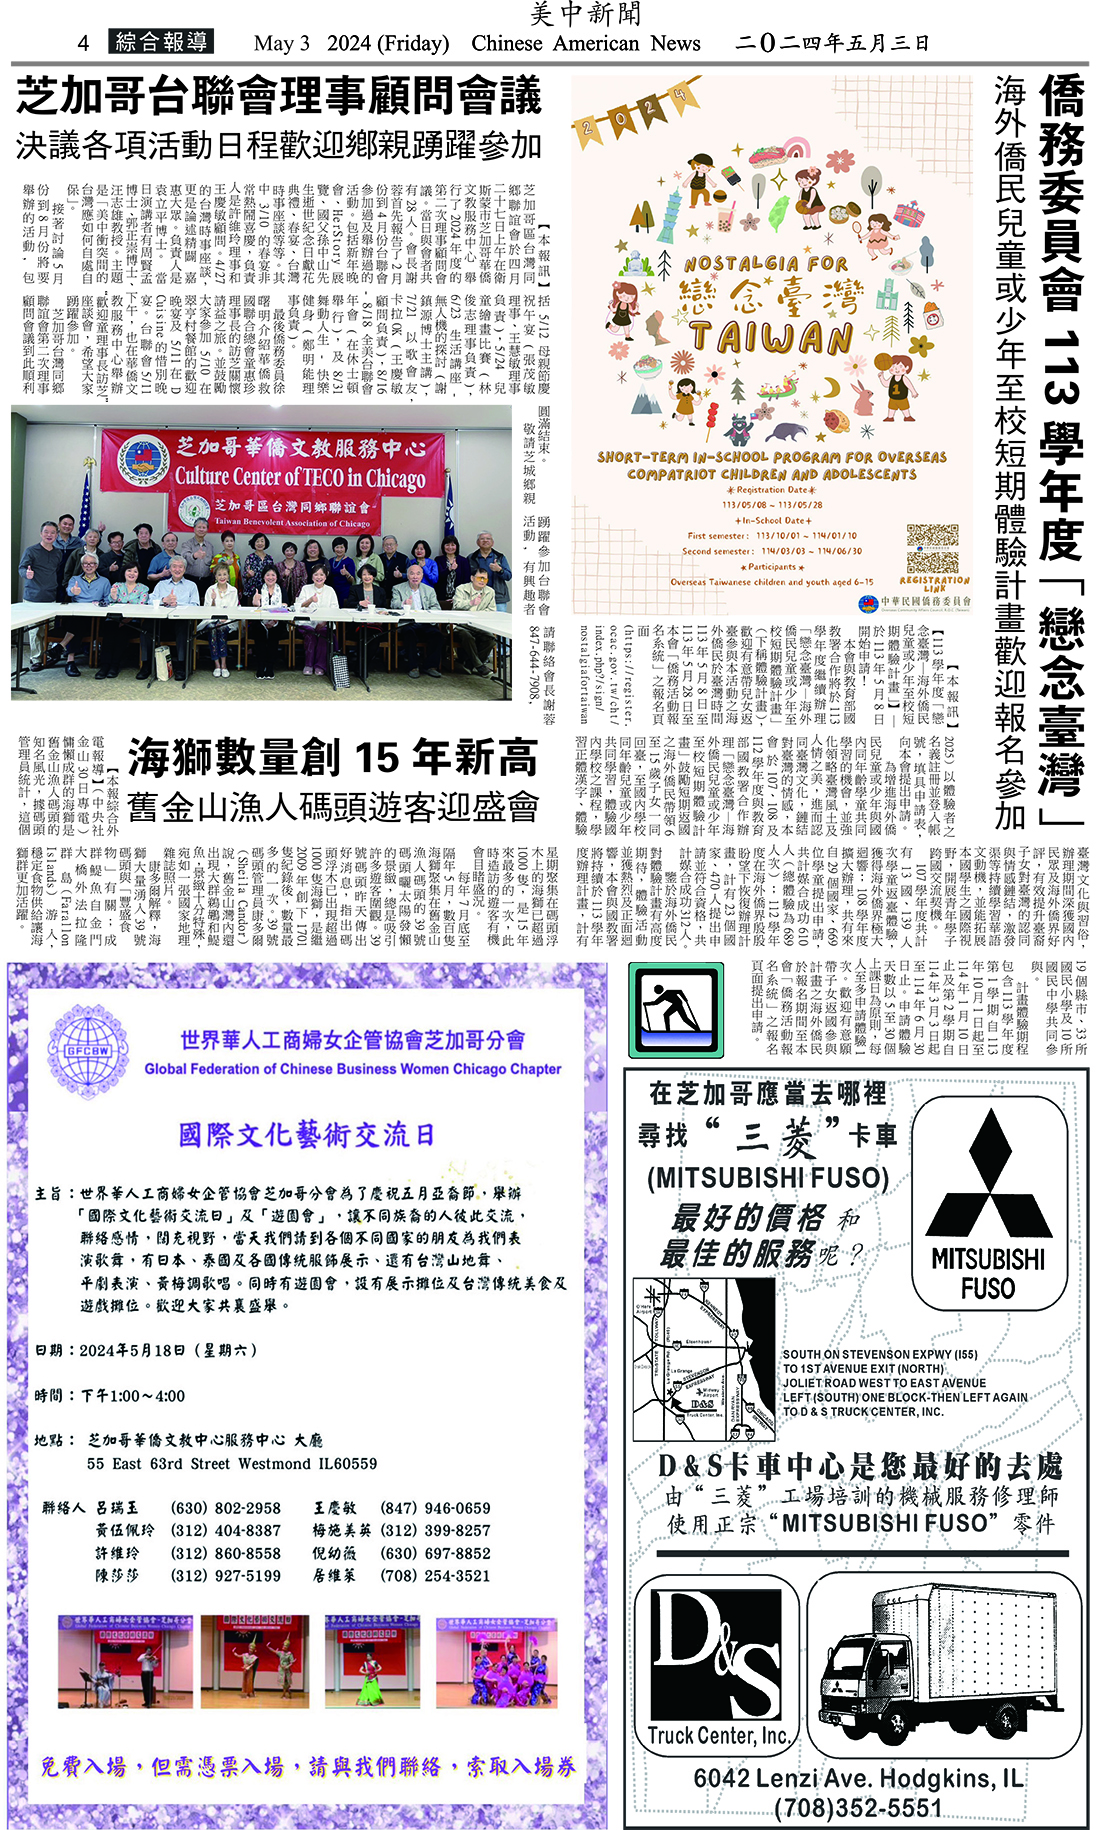 Chinese American News Page04